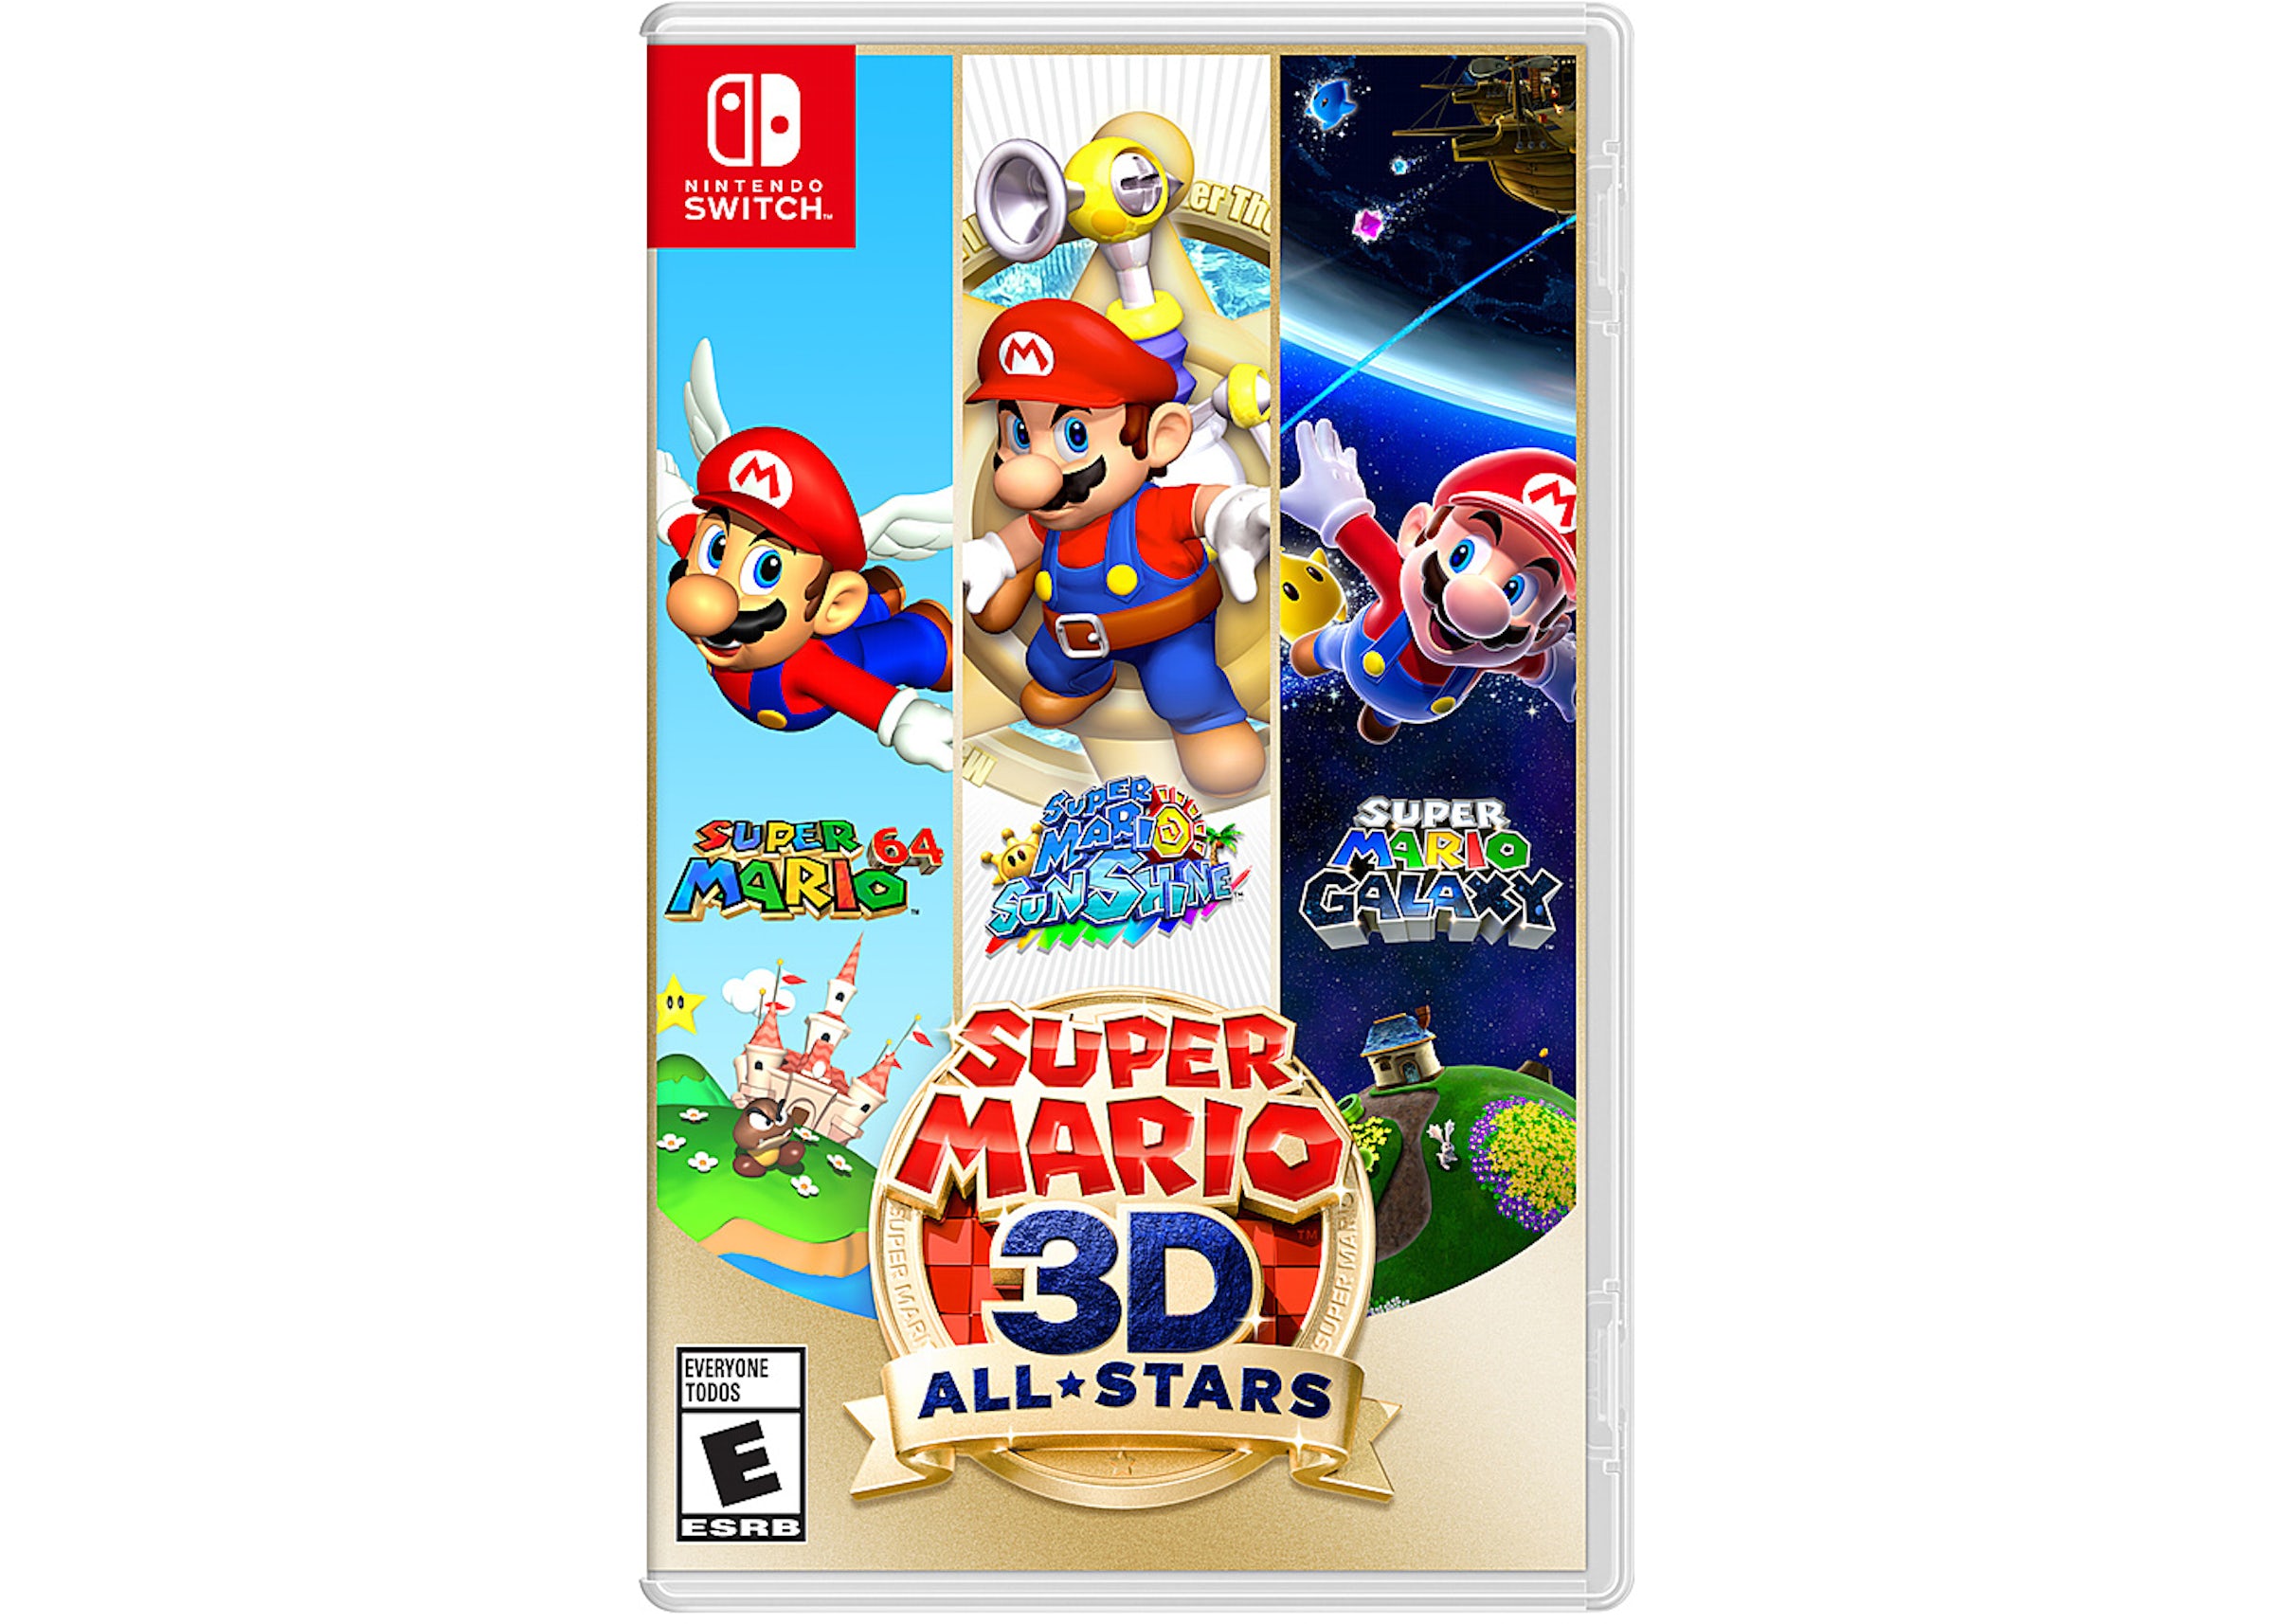 from now on Siesta mouth Nintendo Switch/Lite Super Mario 3D All-Stars Video Game (HACPAVP3A) - US